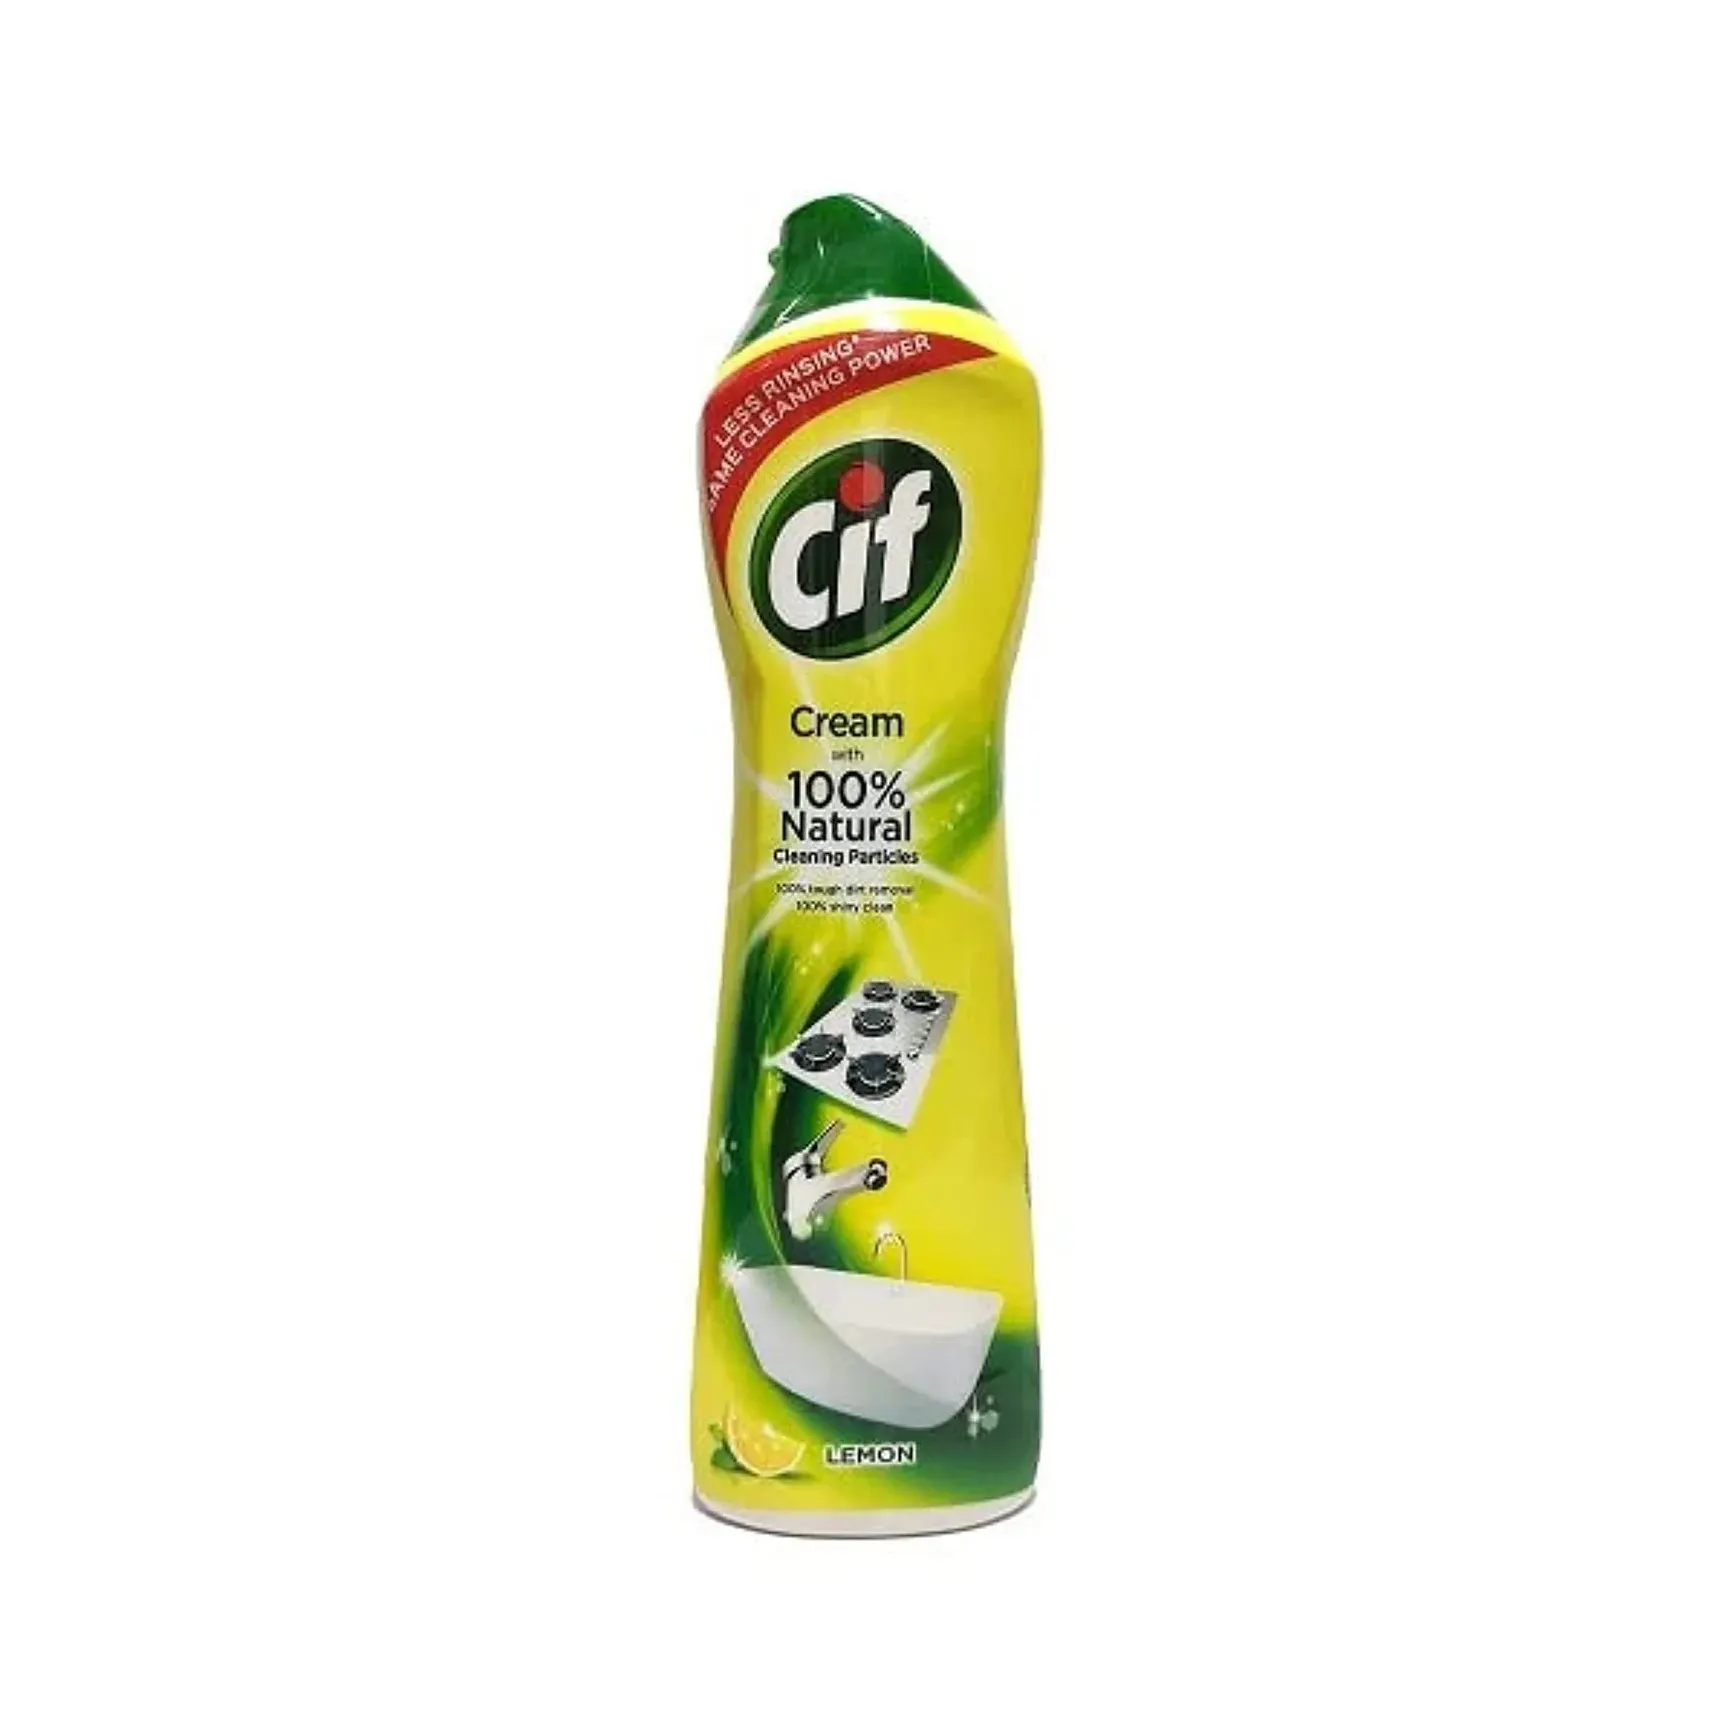 435ml of Effective Cleaning Performance: CIF Spray's Expertise